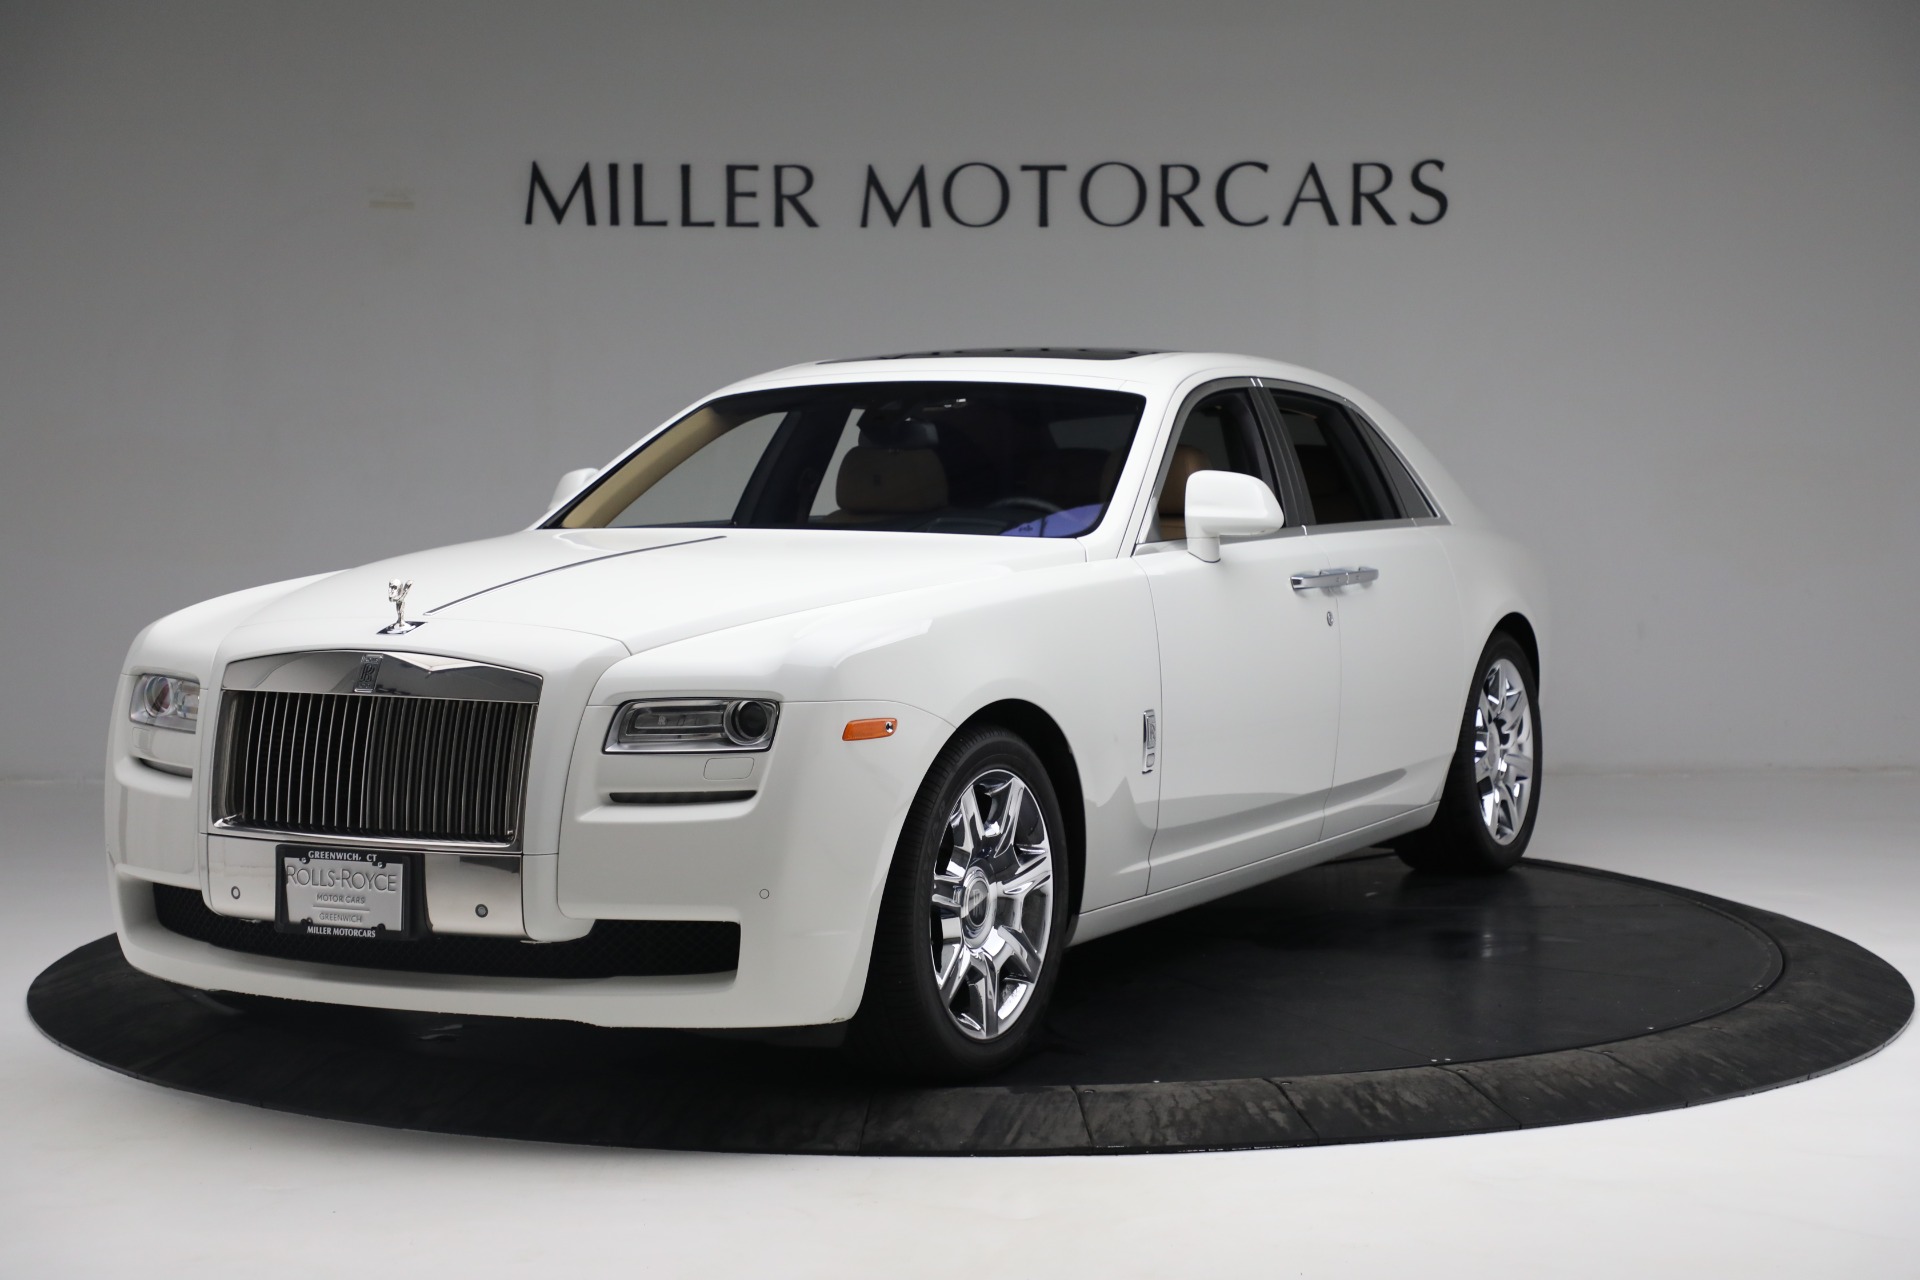 Used 2013 Rolls-Royce Ghost for sale Sold at Bugatti of Greenwich in Greenwich CT 06830 1